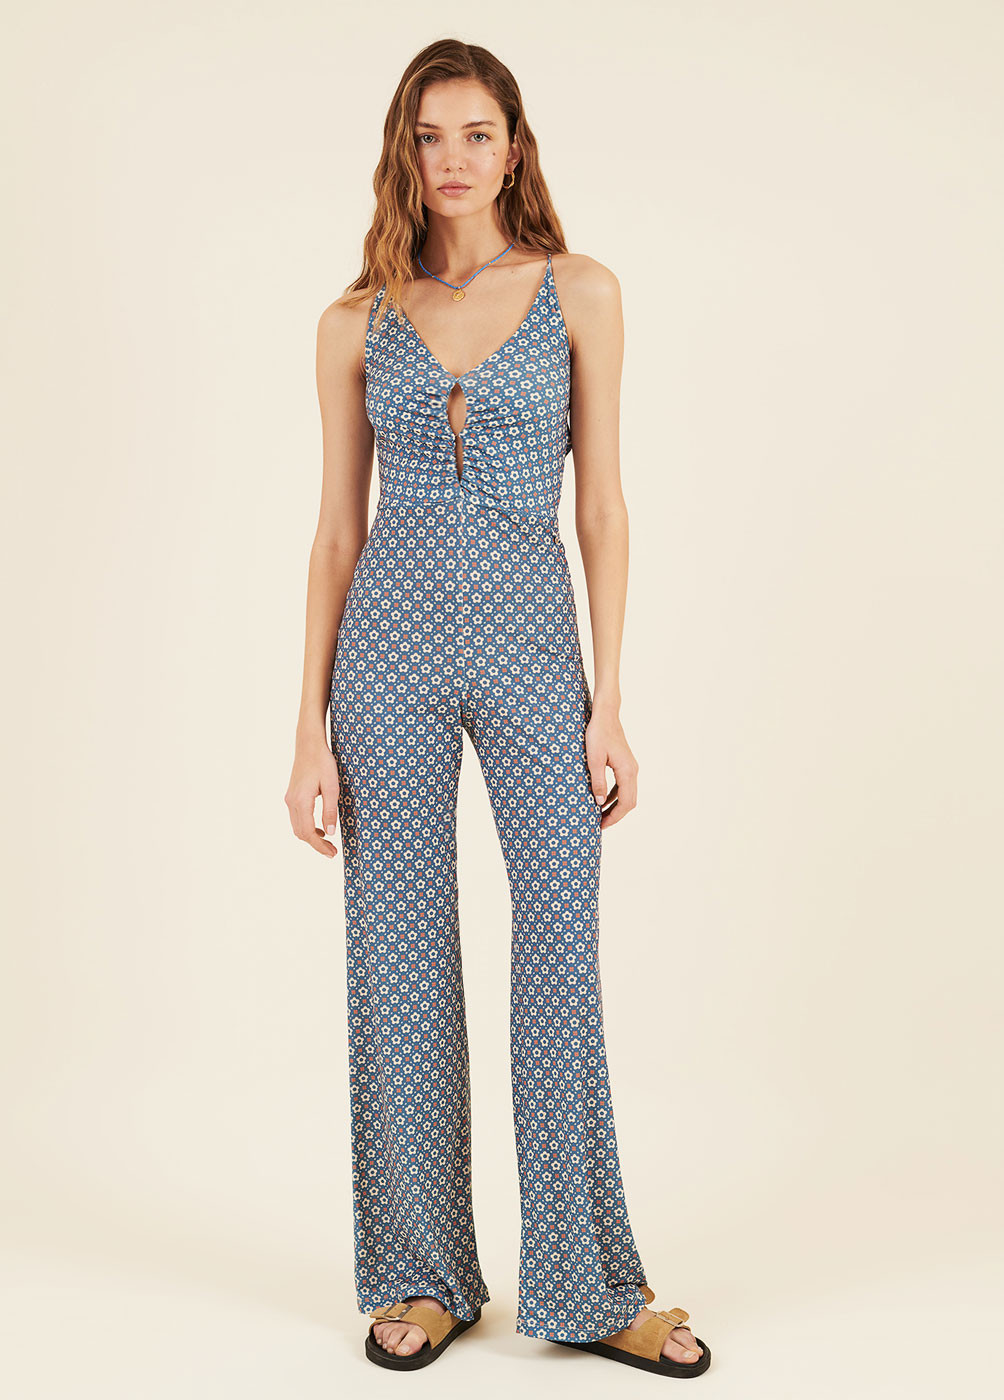 FUN JUMPSUIT - WITHDRAWAL LATER